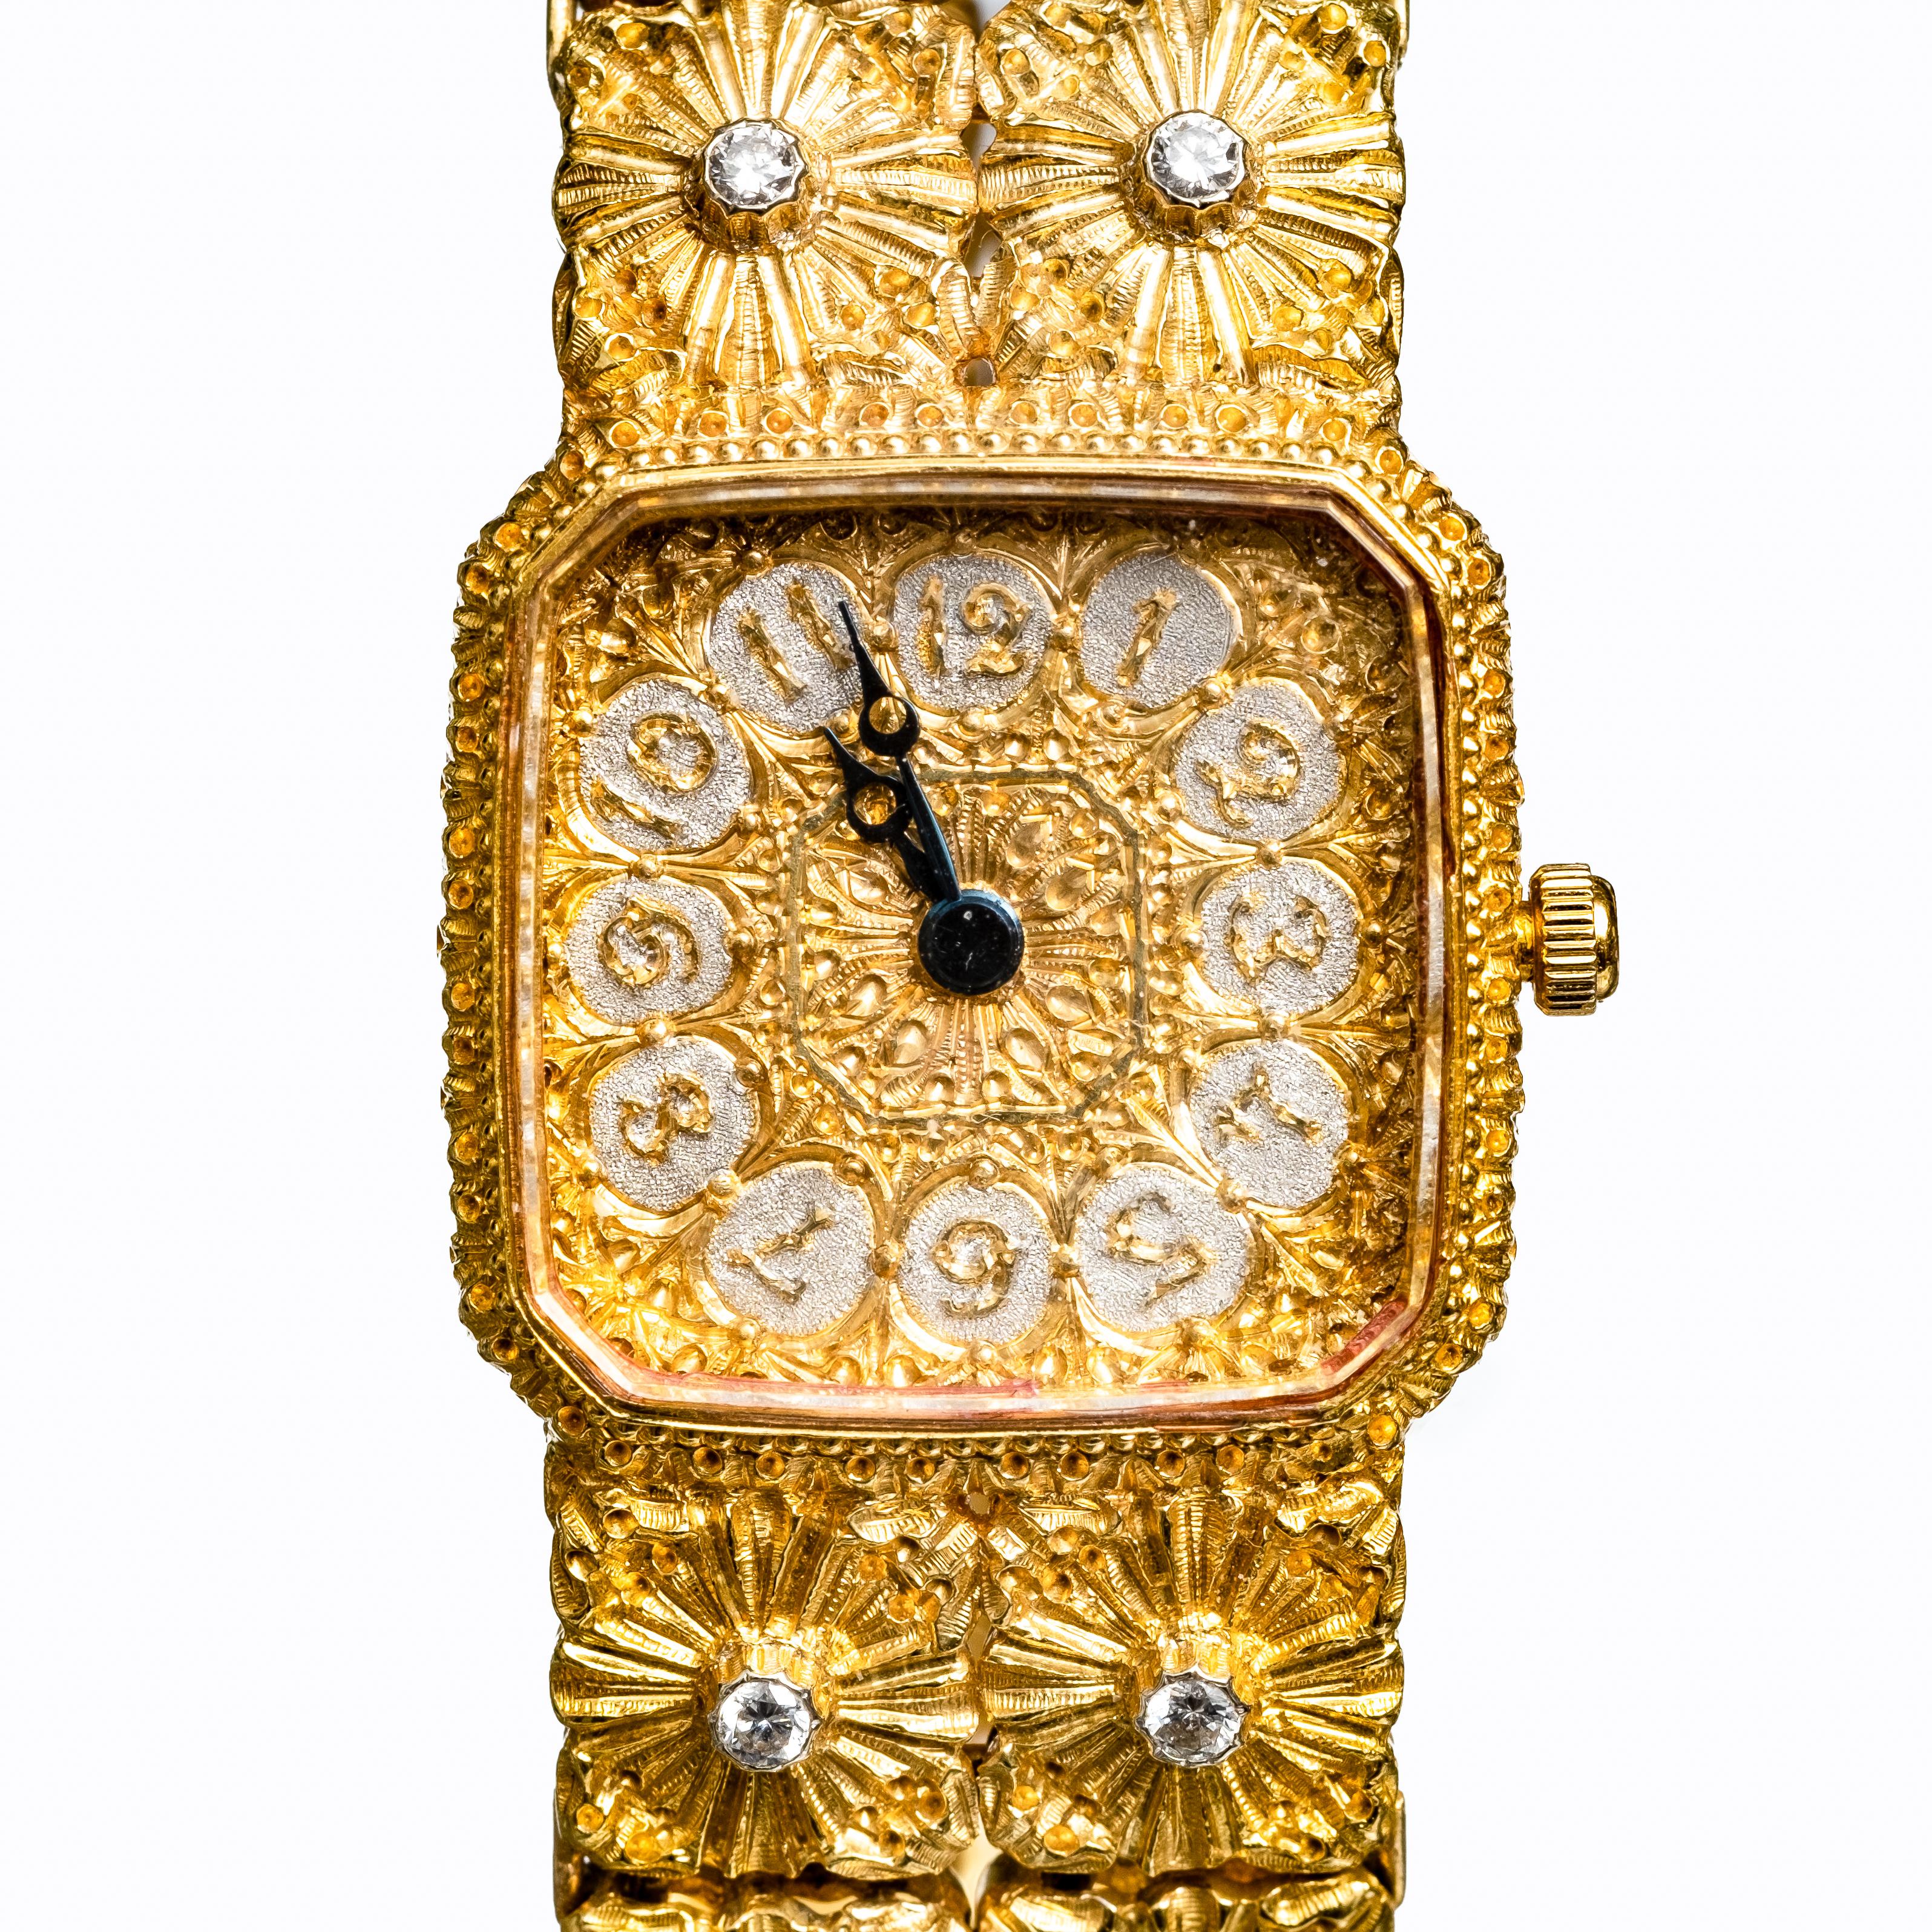 Gianmaria Buccellati Rare, Authentic ladies wristwatch. This watch is 18K yellow gold with the Hermes gold bracelet There are white gold accents over the indices. The band is studded with 34 round brilliant cut diamonds. The back of the band is